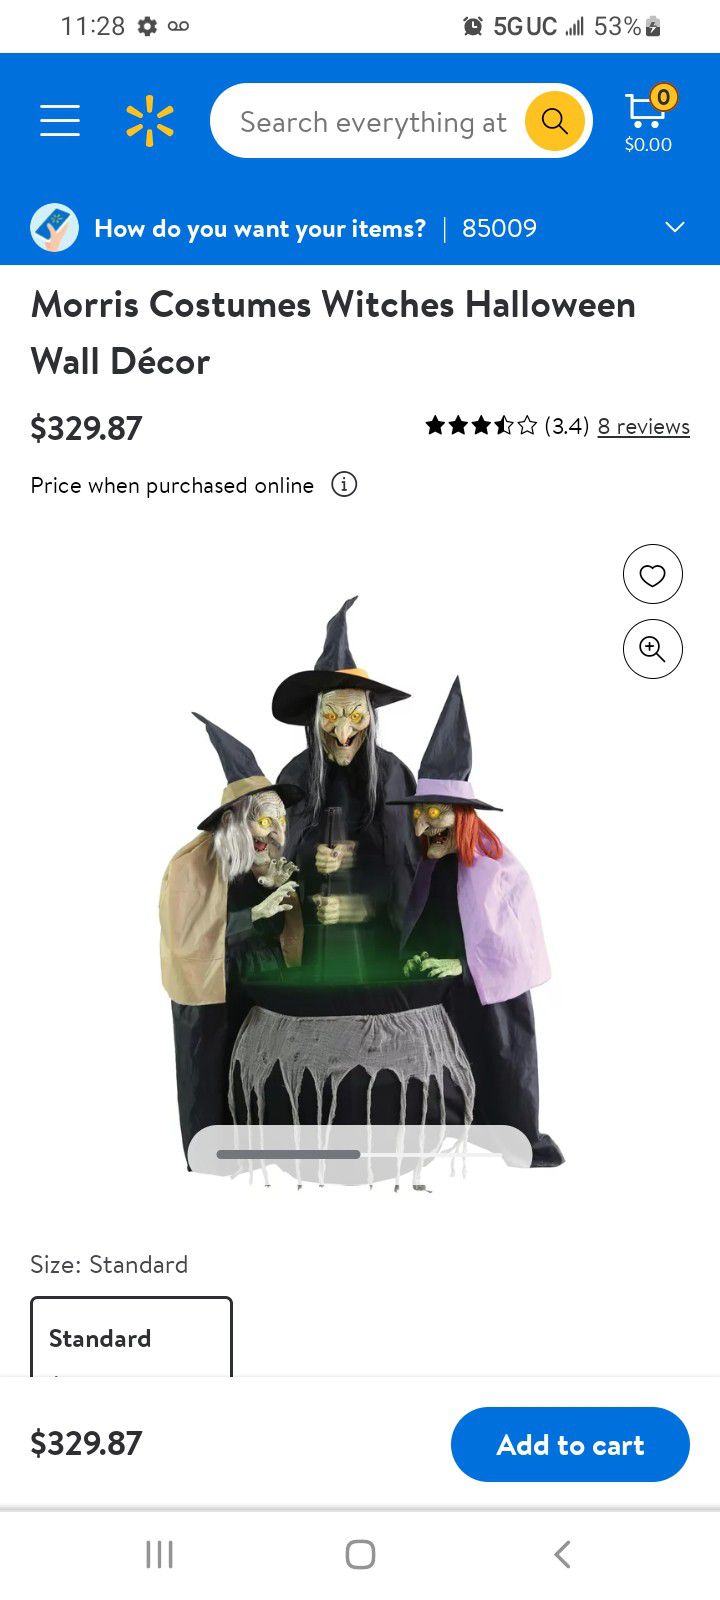 Animatronic Sister Witches Stirring Pot Talks And Moves Halloween Decor Eyes Light Up $250 Obo